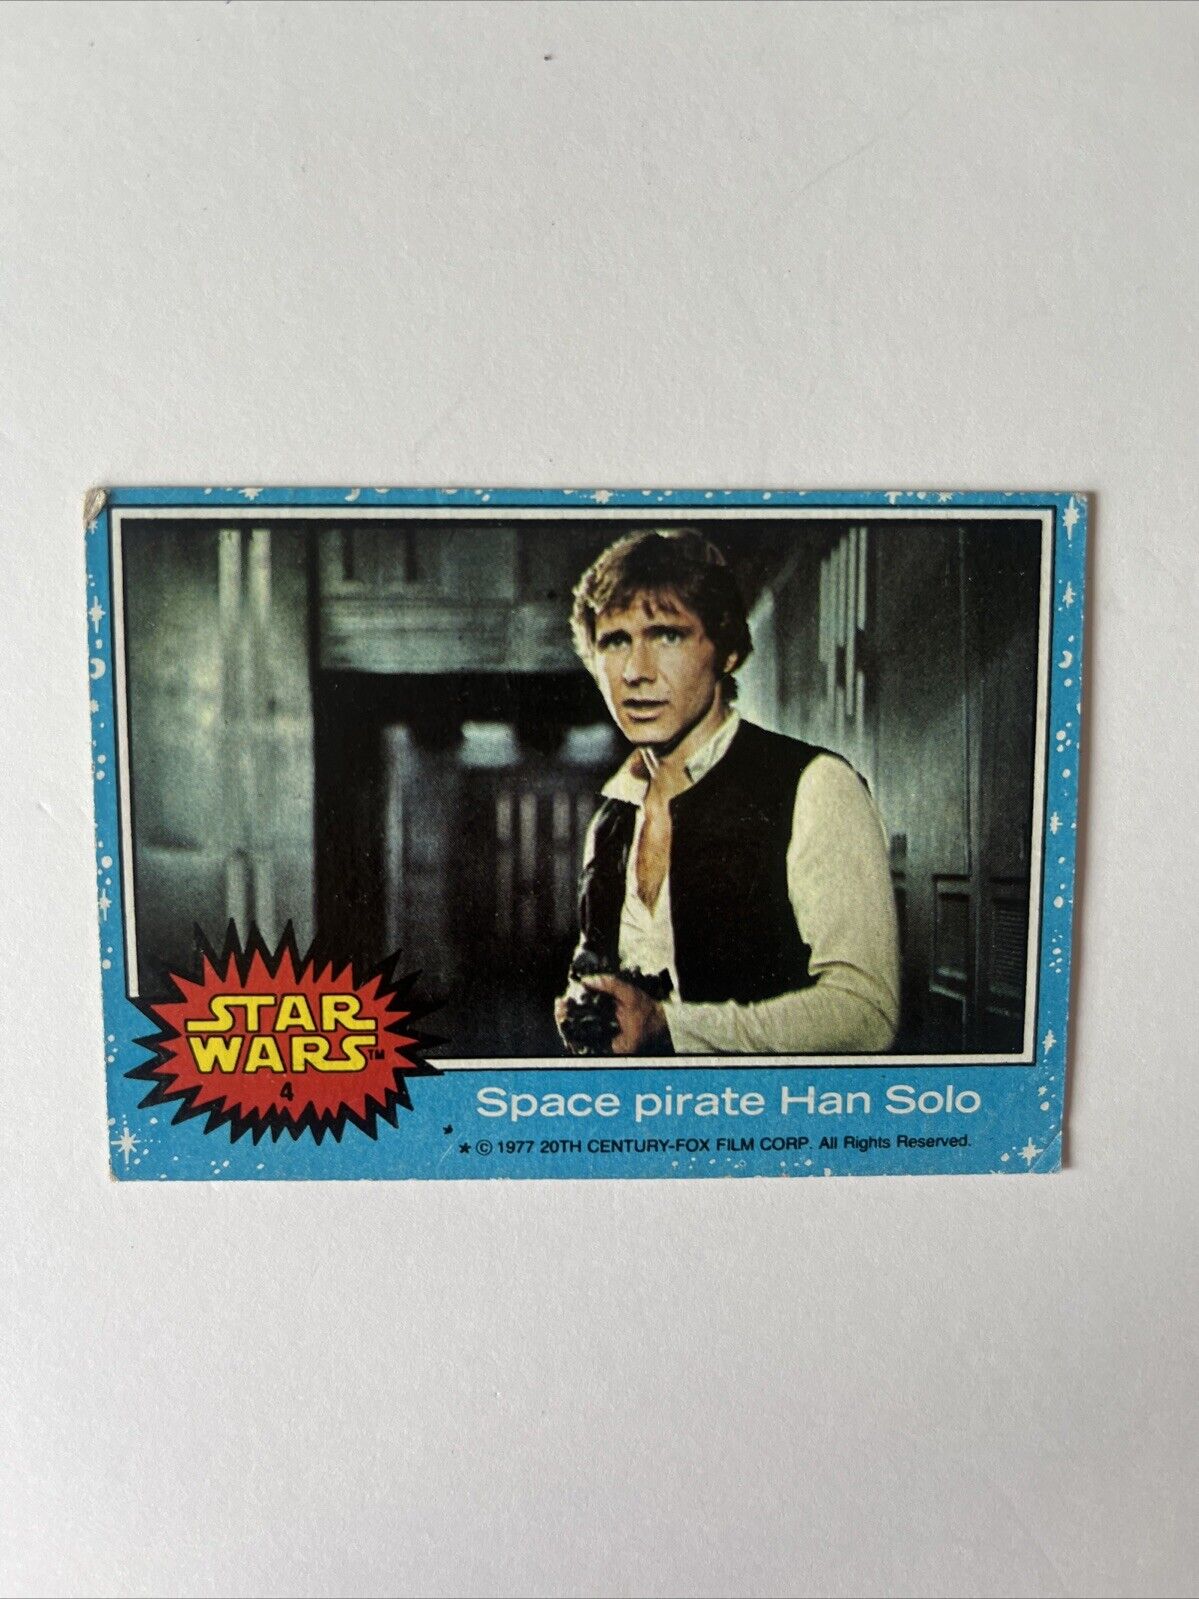 HAN SOLO #4 CARD star wars 1977 Topps trading cards